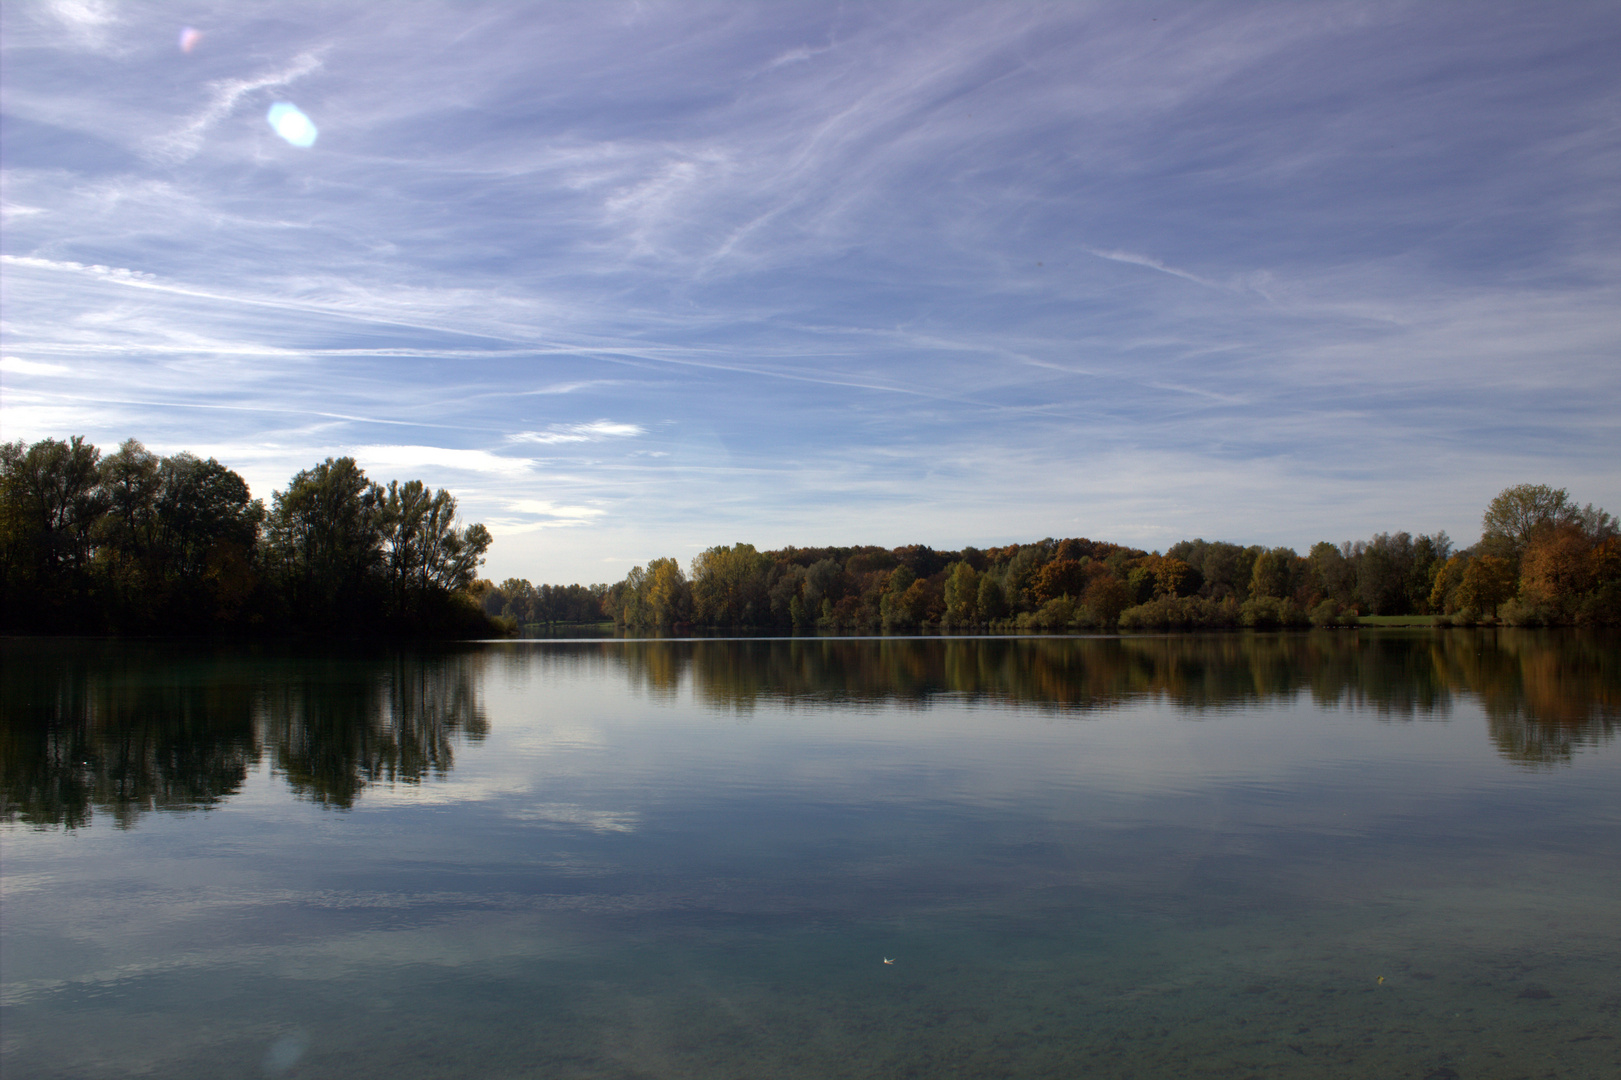 Herbst am See